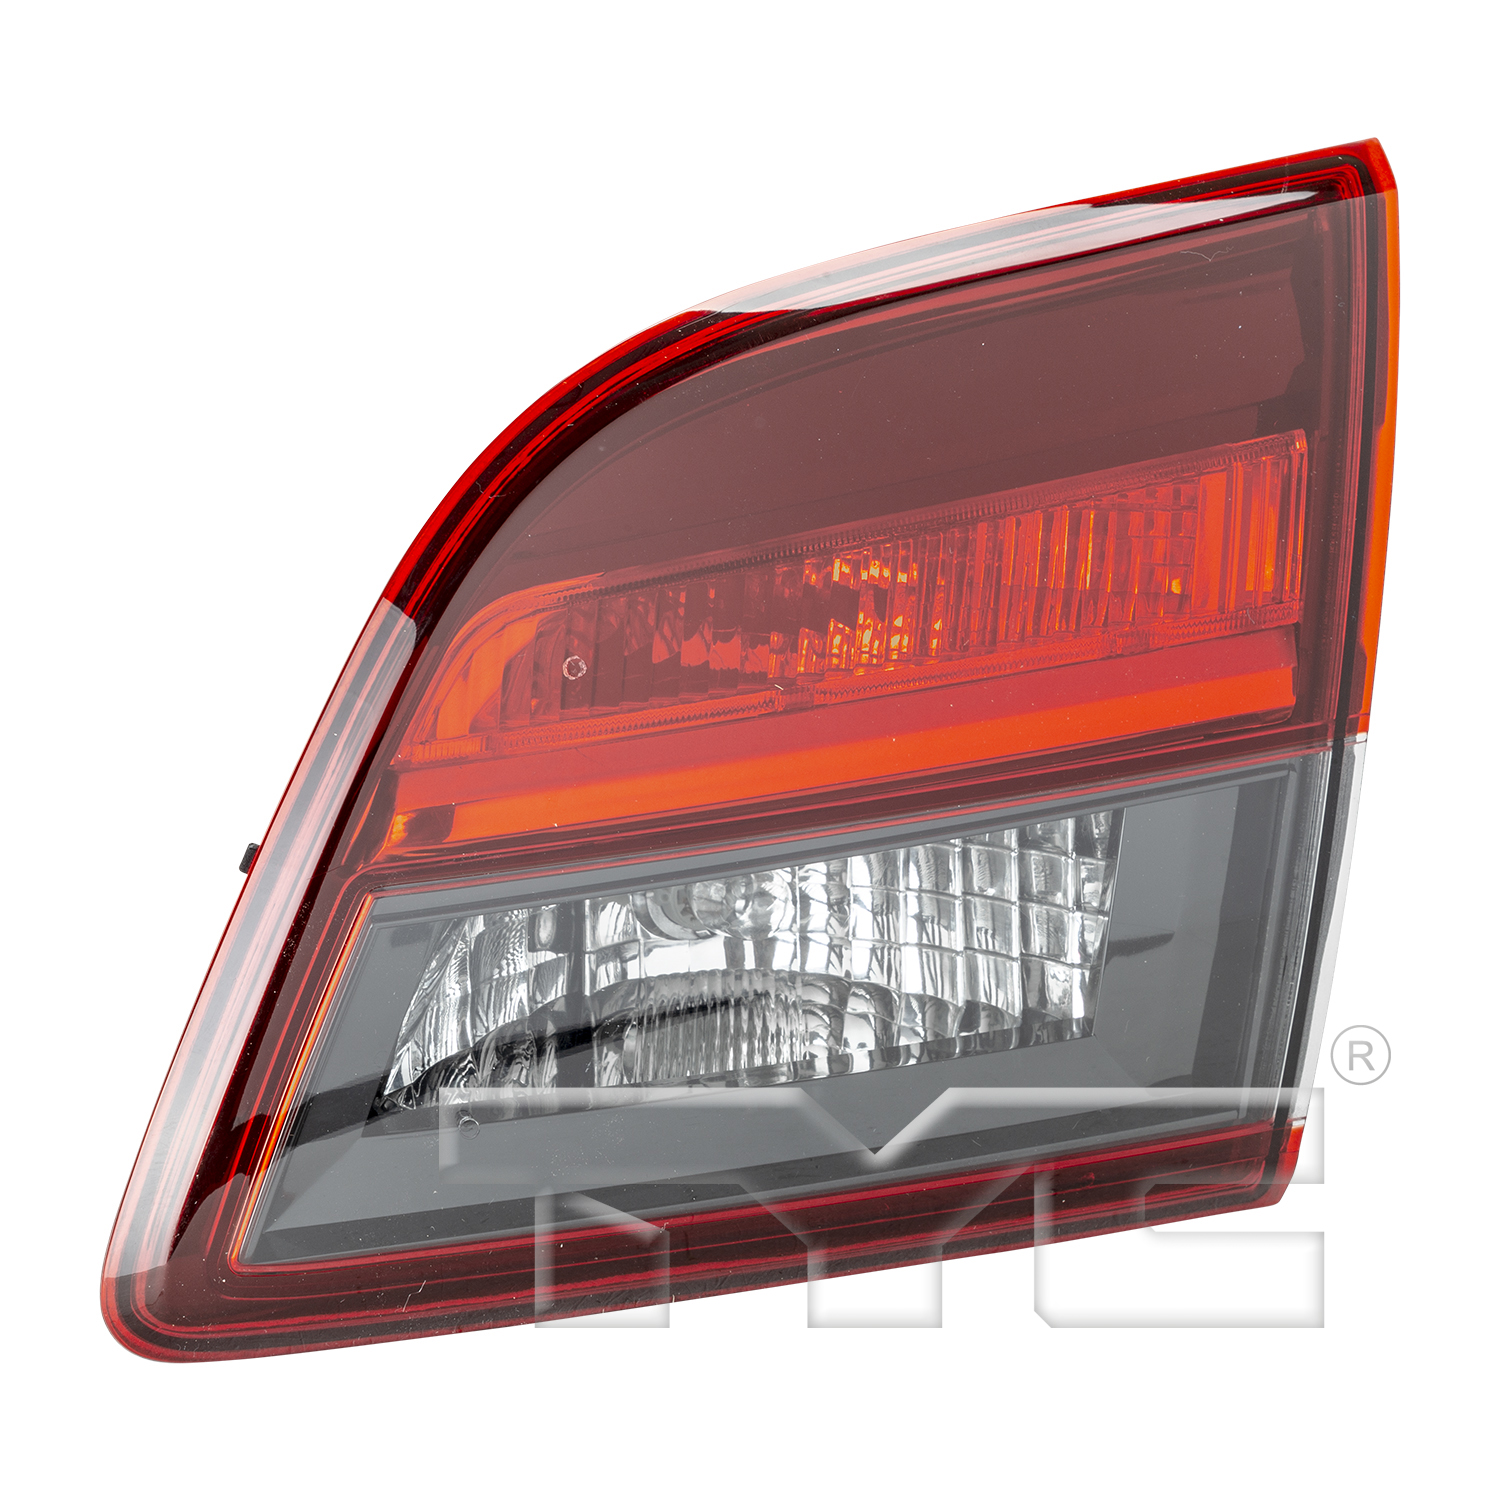 Aftermarket TAILLIGHTS for MAZDA - CX-9, CX-9,13-15,RT Taillamp assy inner